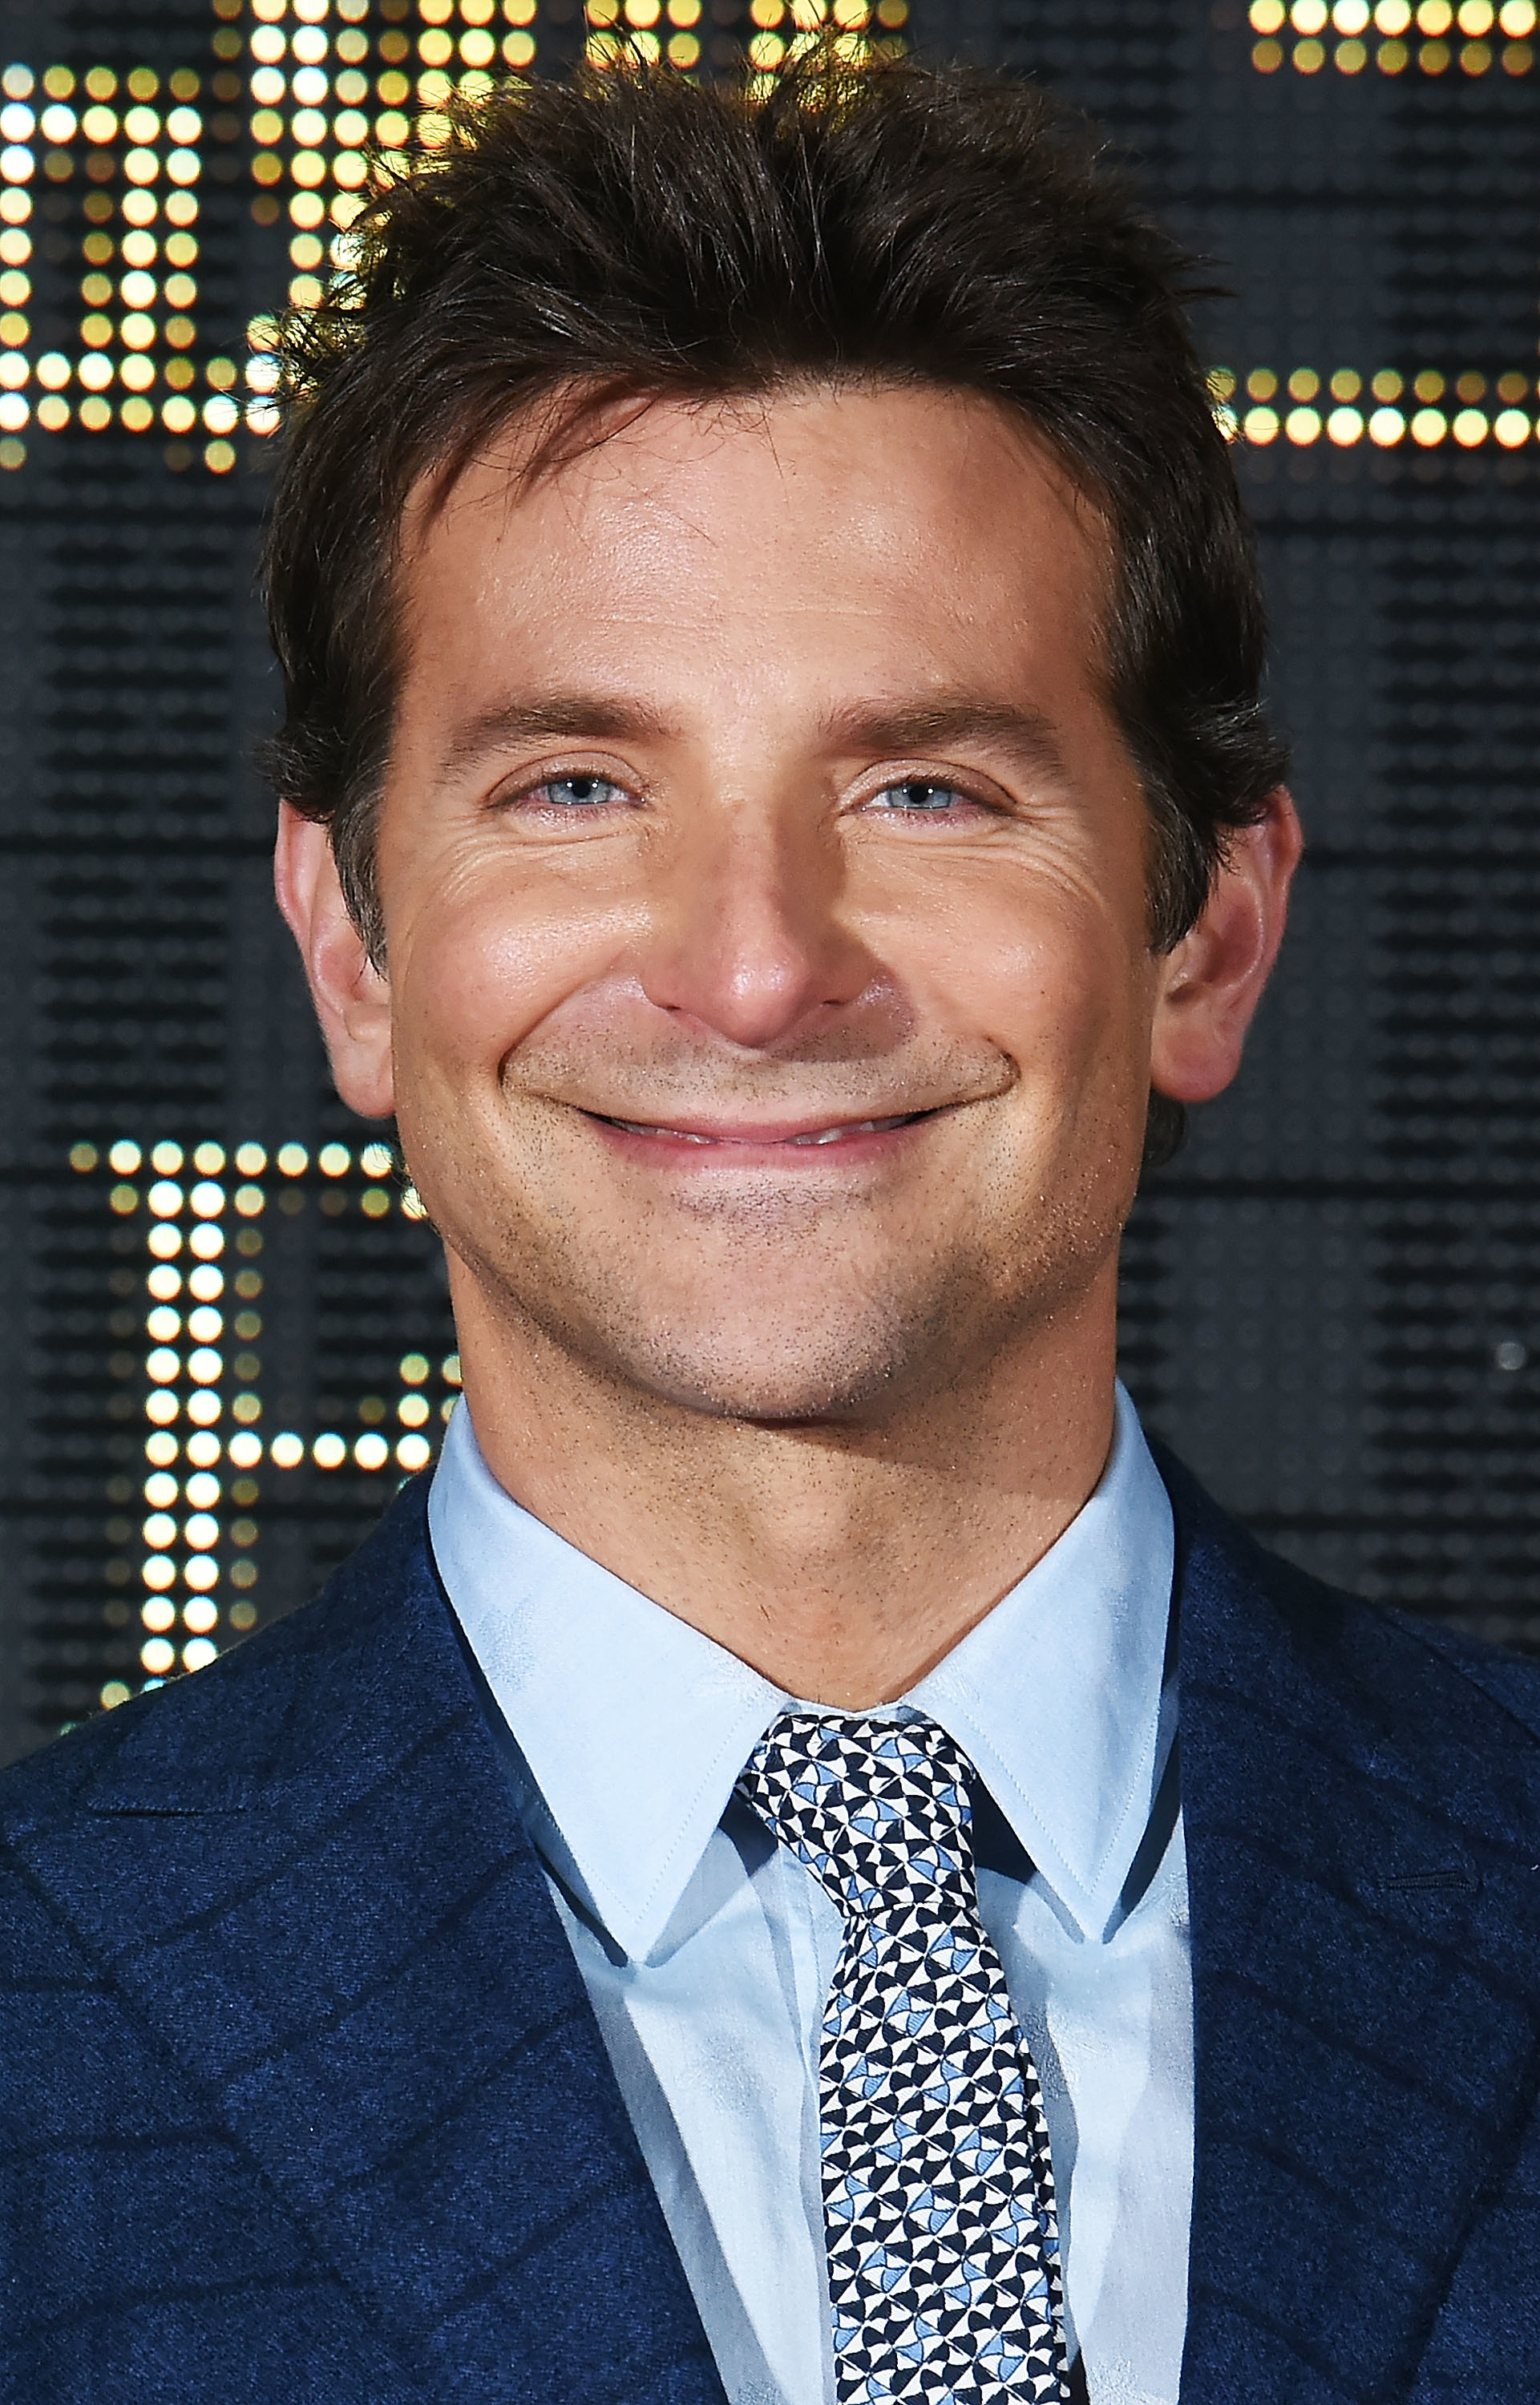 Bradley, in a patterned tie and blue suit jacket, smiling at a celebrity event